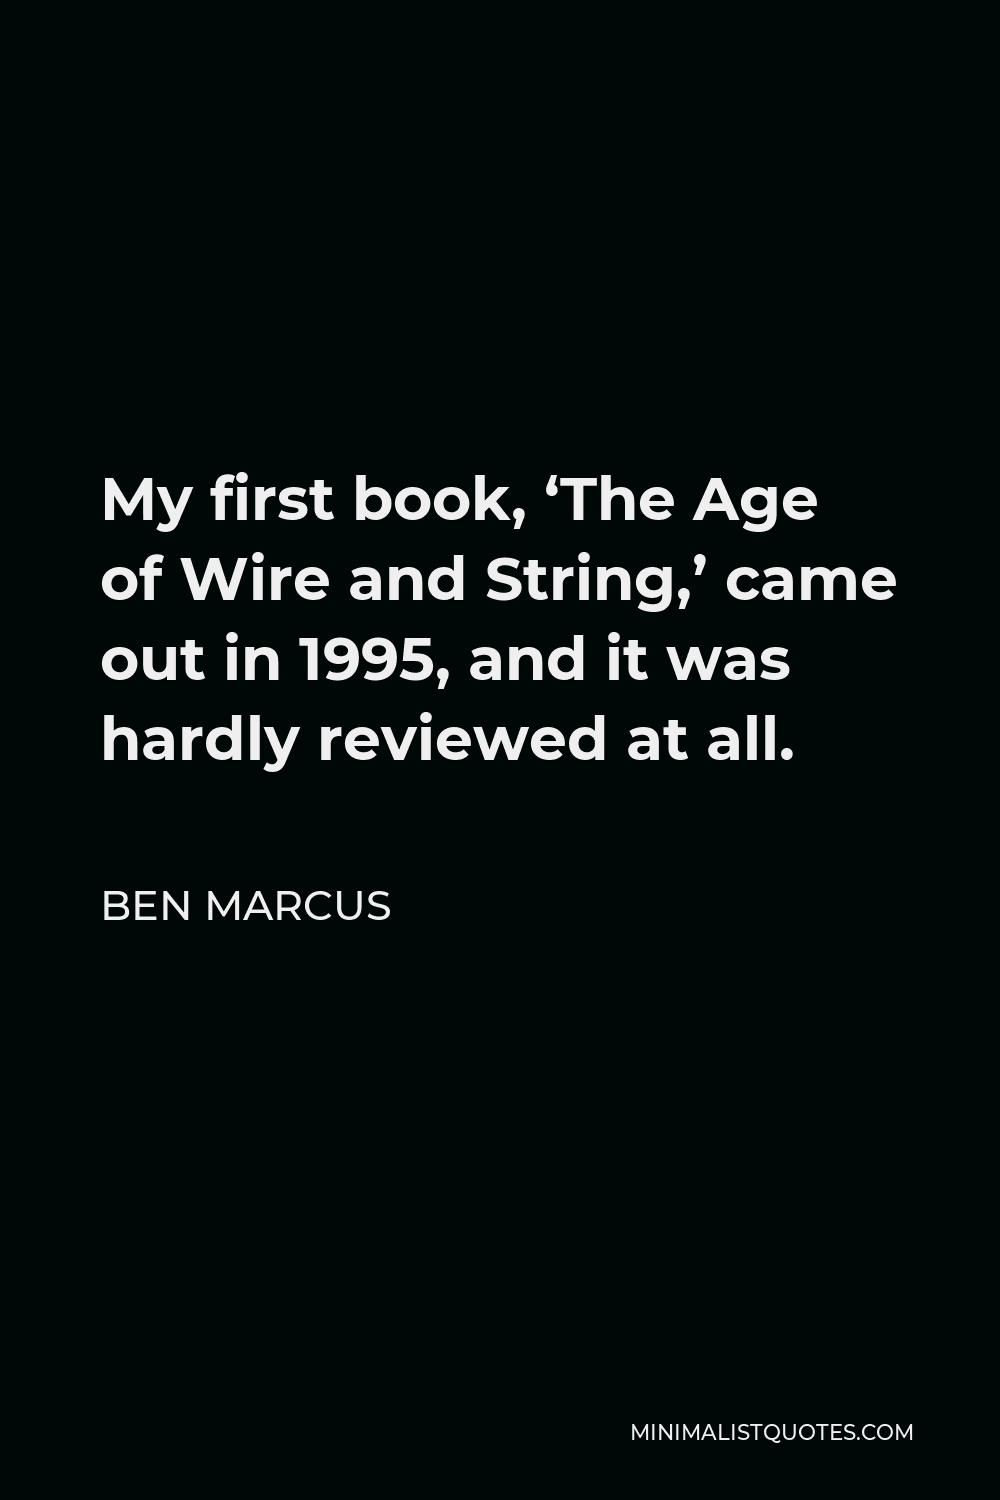 Ben Marcus Quote - My first book, ‘The Age of Wire and String,’ came out in 1995, and it was hardly reviewed at all.